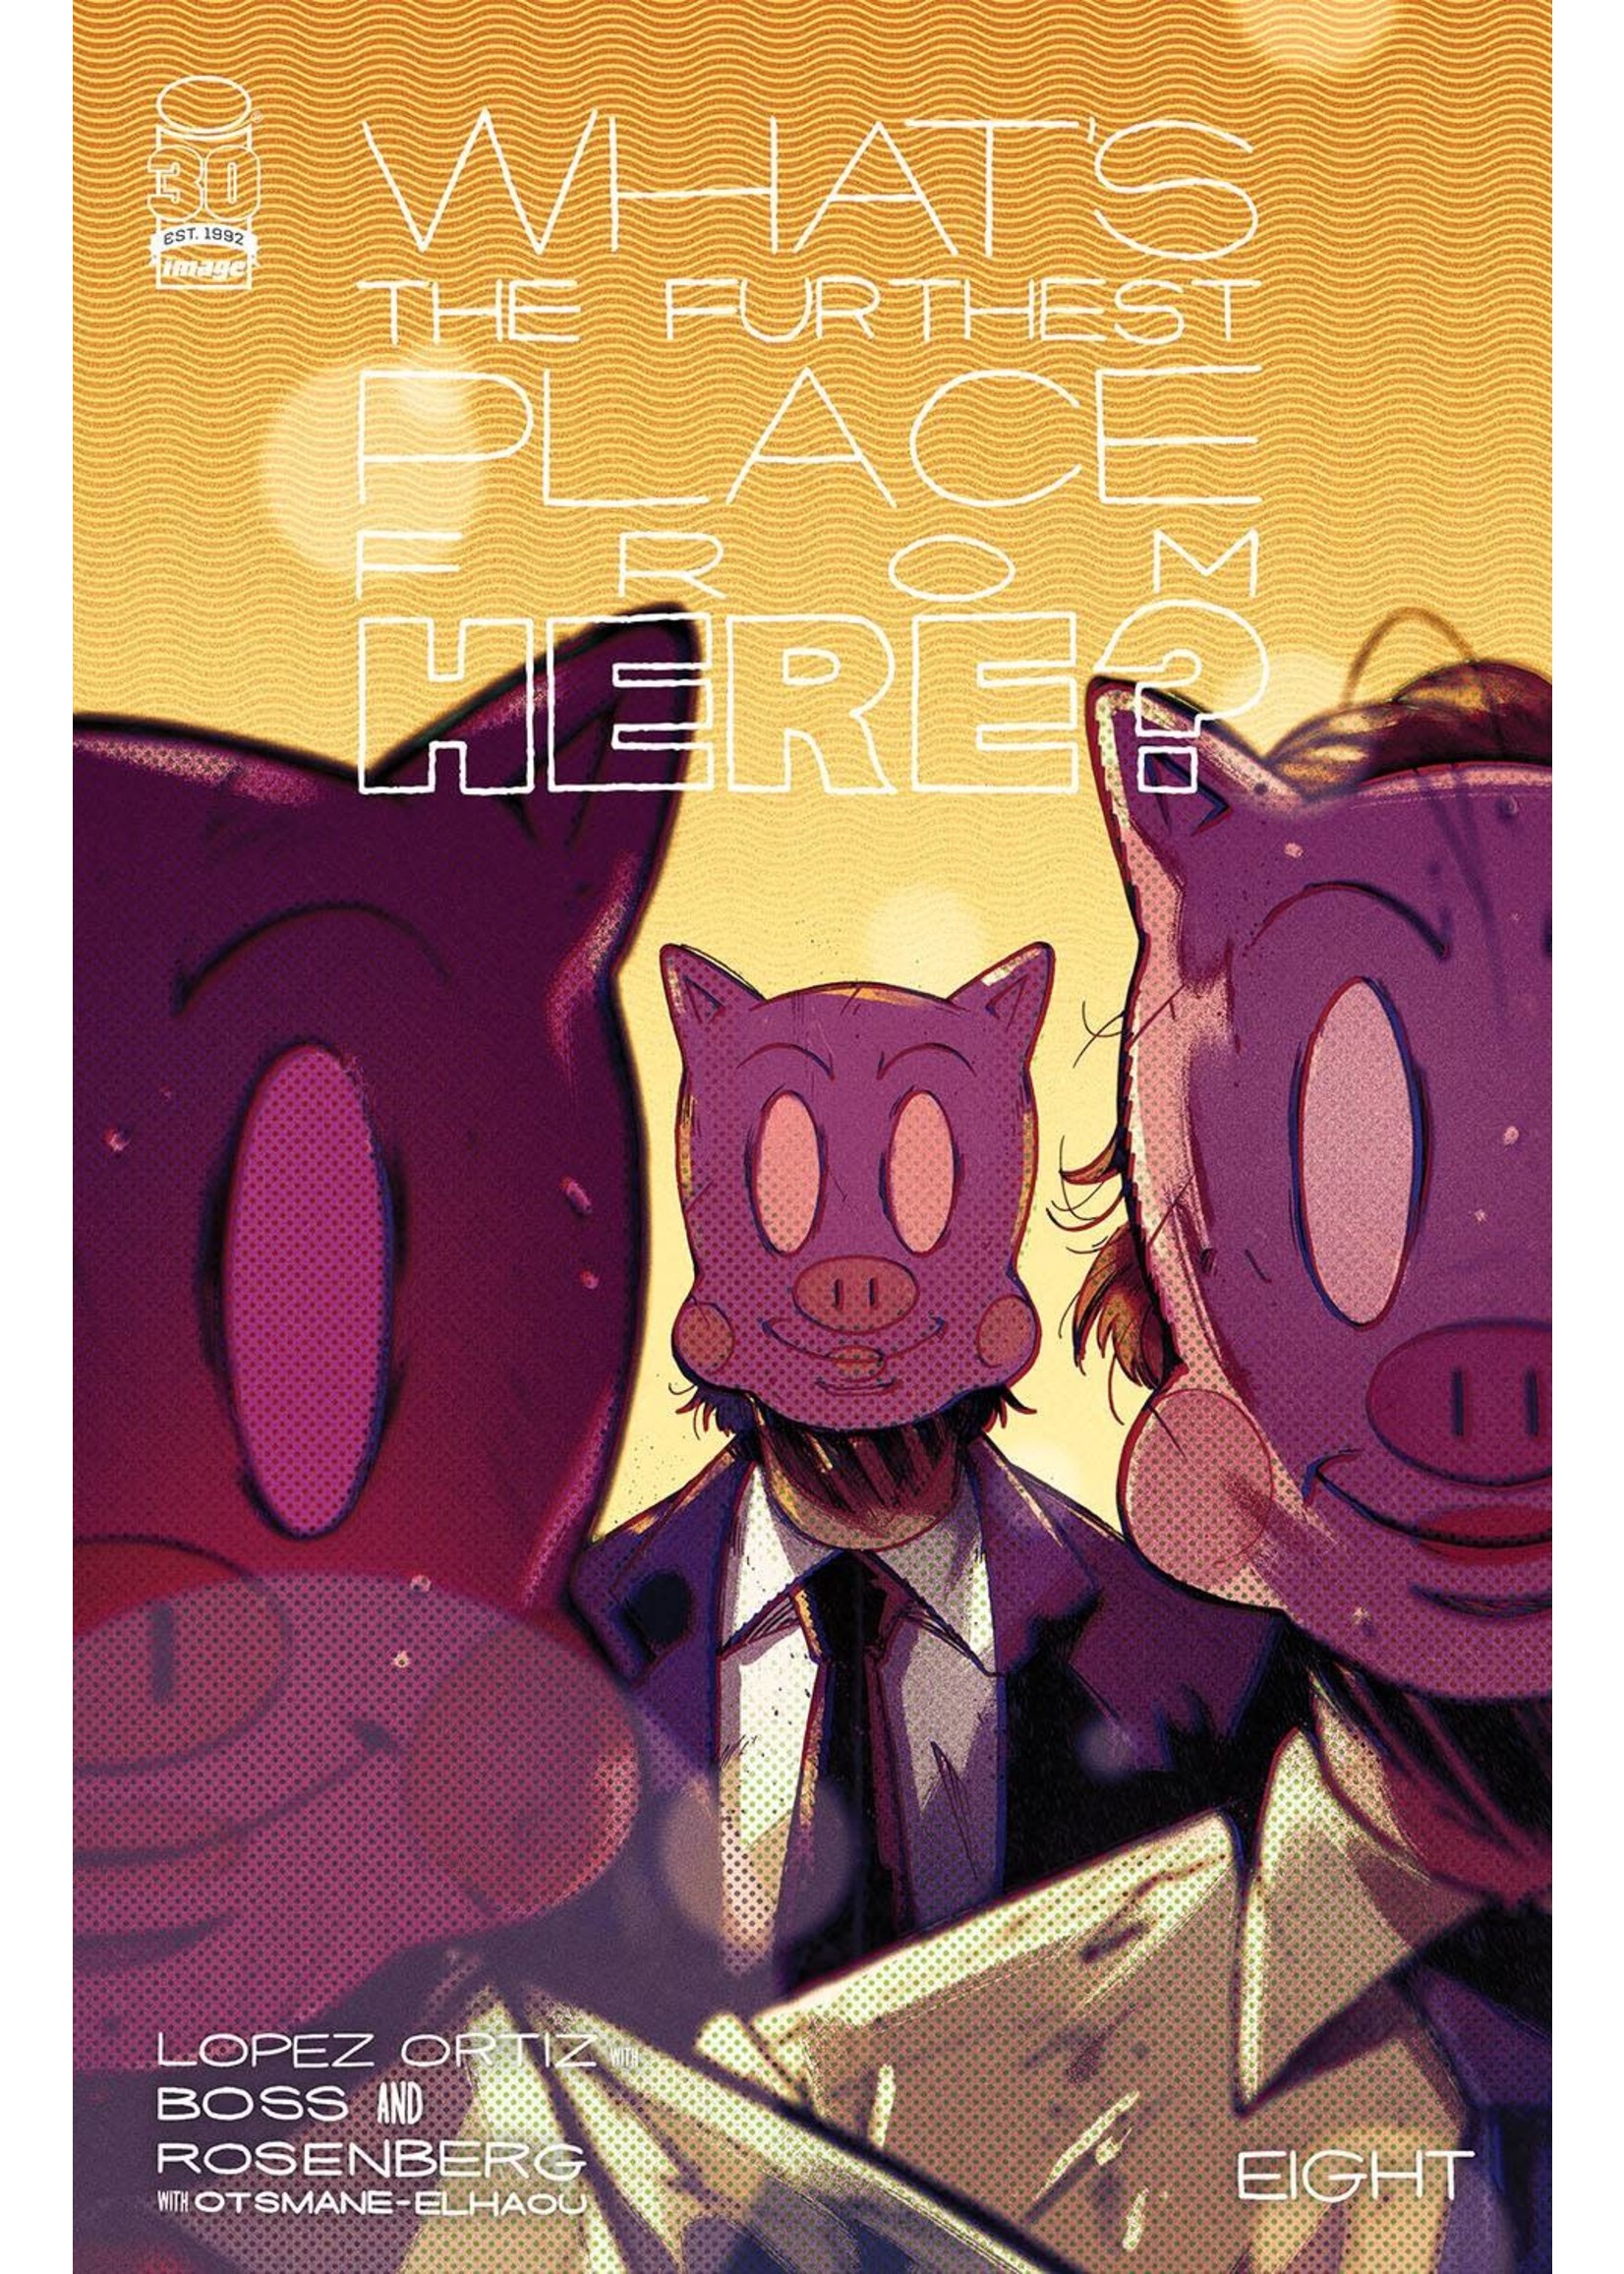 IMAGE COMICS WHATS THE FURTHEST PLACE FROM HERE #8 CVR B ORTIZ